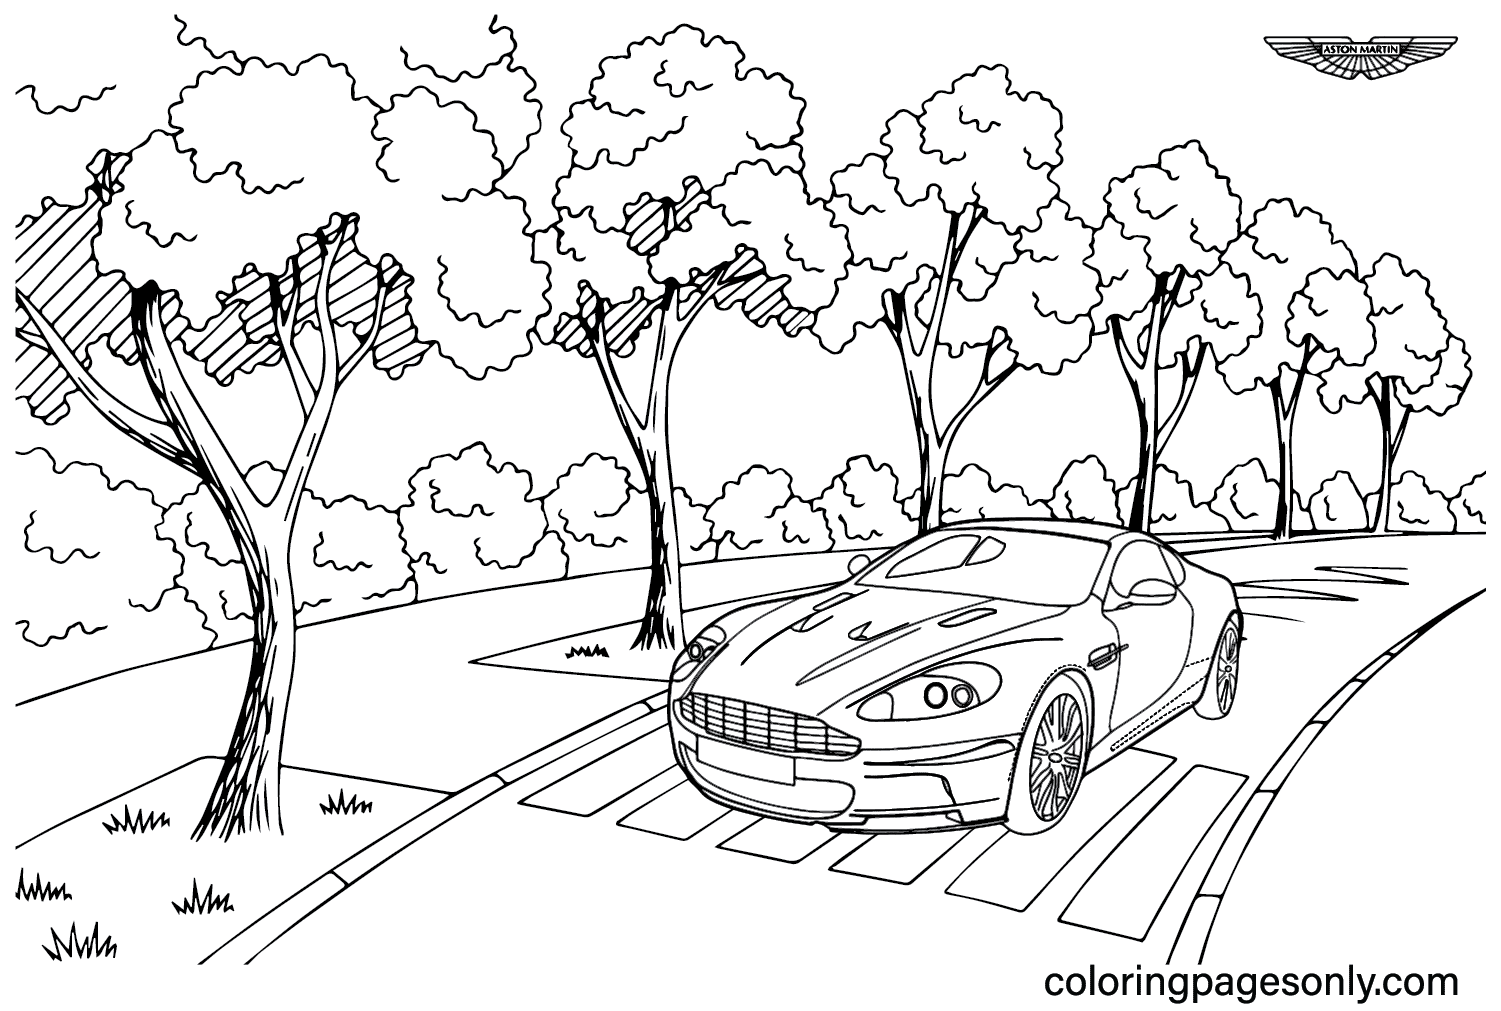 Aston Martin DBS V12 Coloring Page - Free Printable Coloring Pages